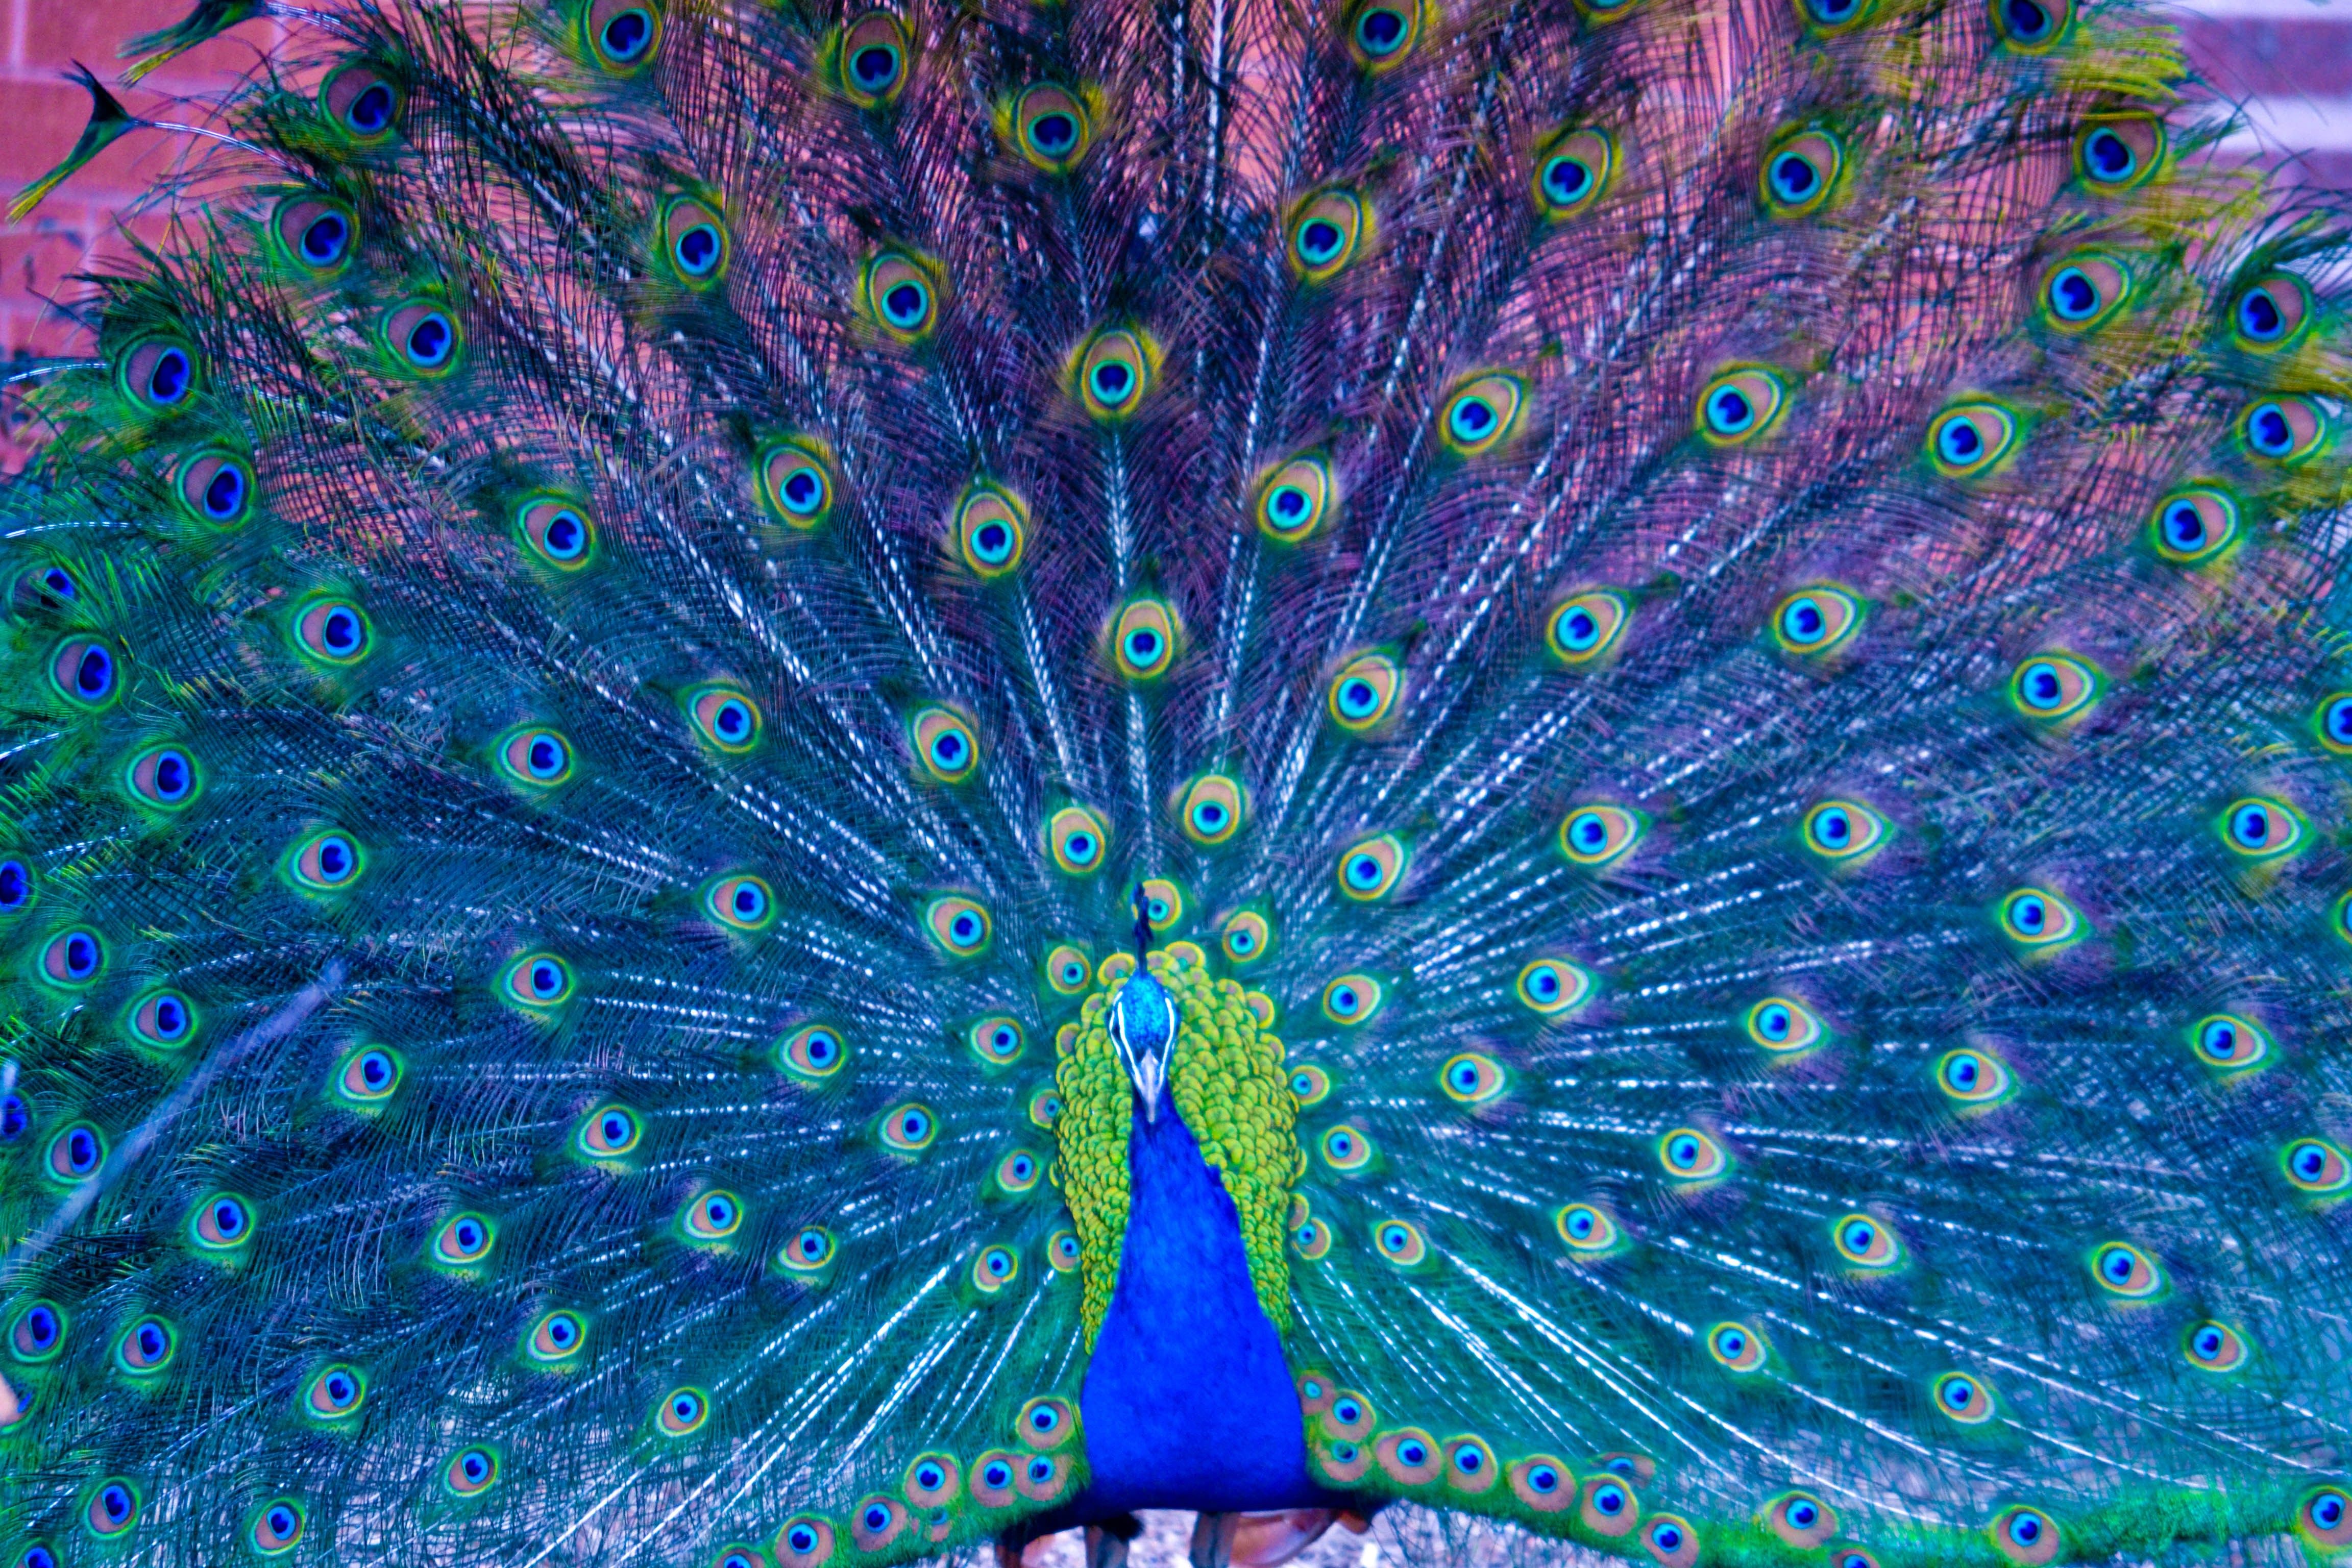 Colorful peacock pictures | Peacocks | Pinterest | Peacocks, Peacock ...